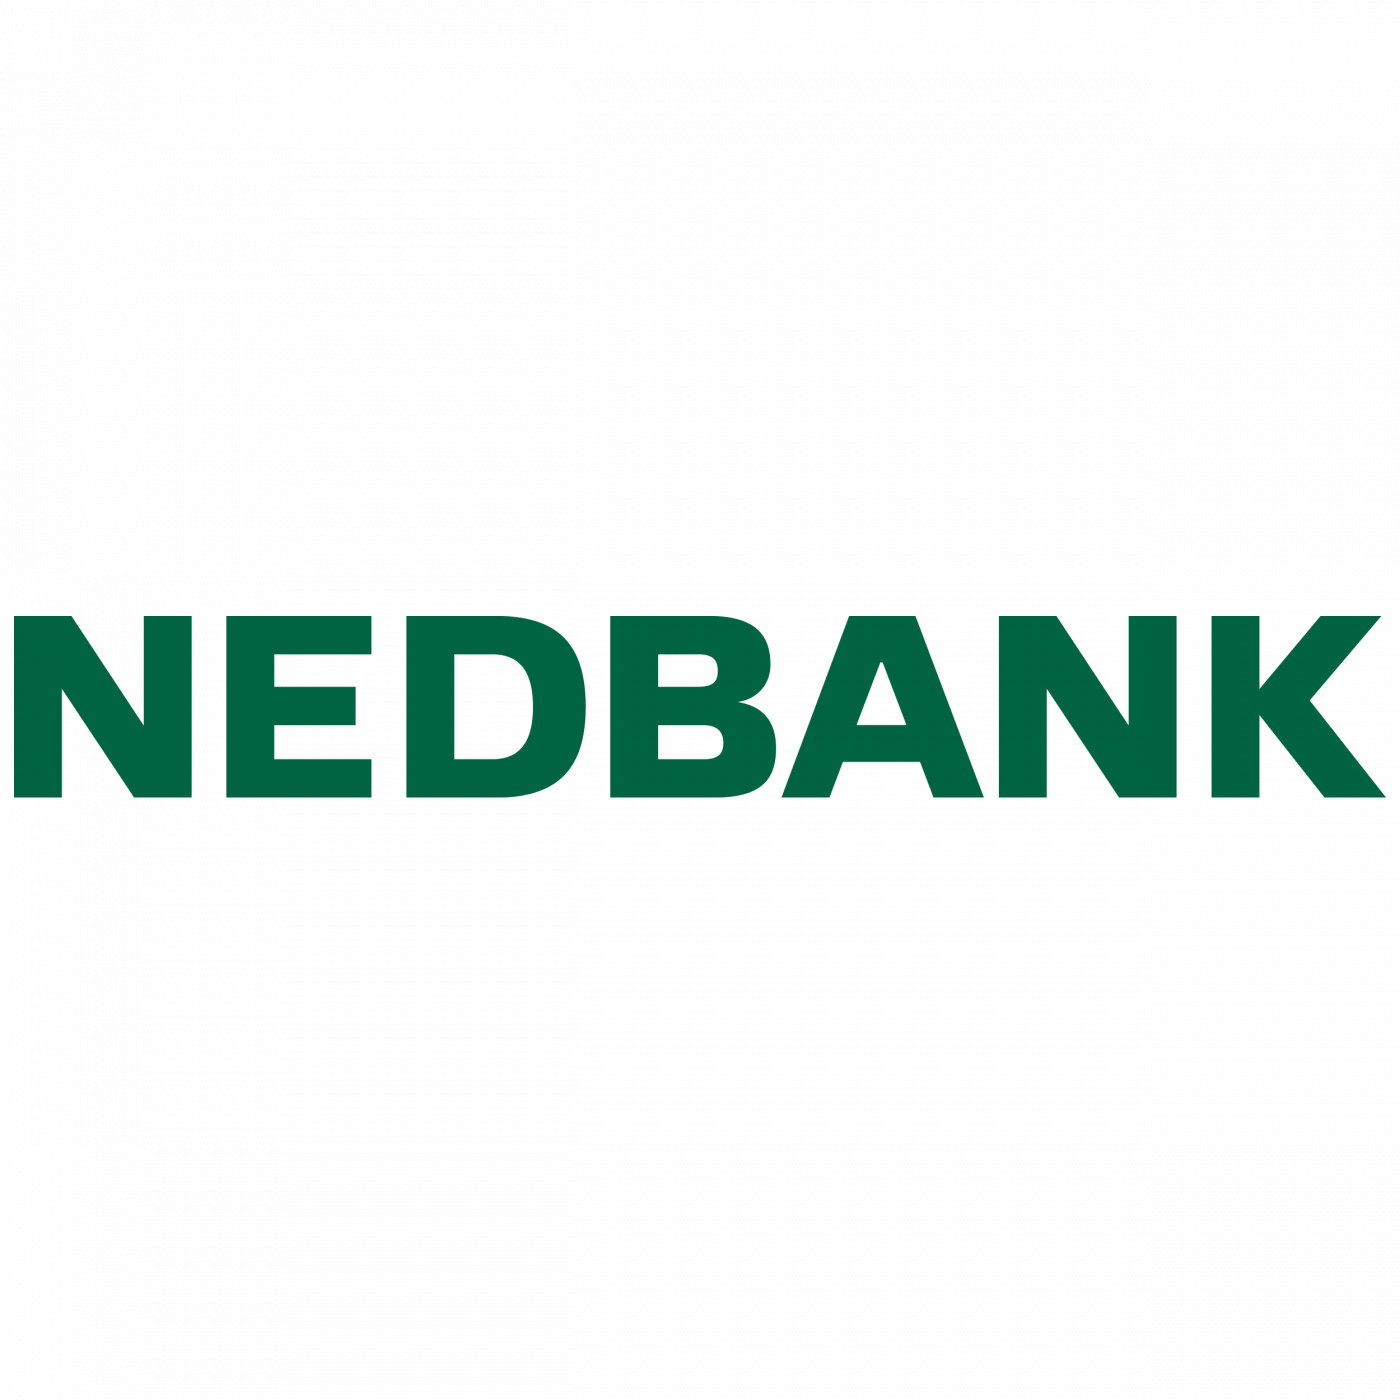 The global trade insights podcast powered by Nedbank Business Banking